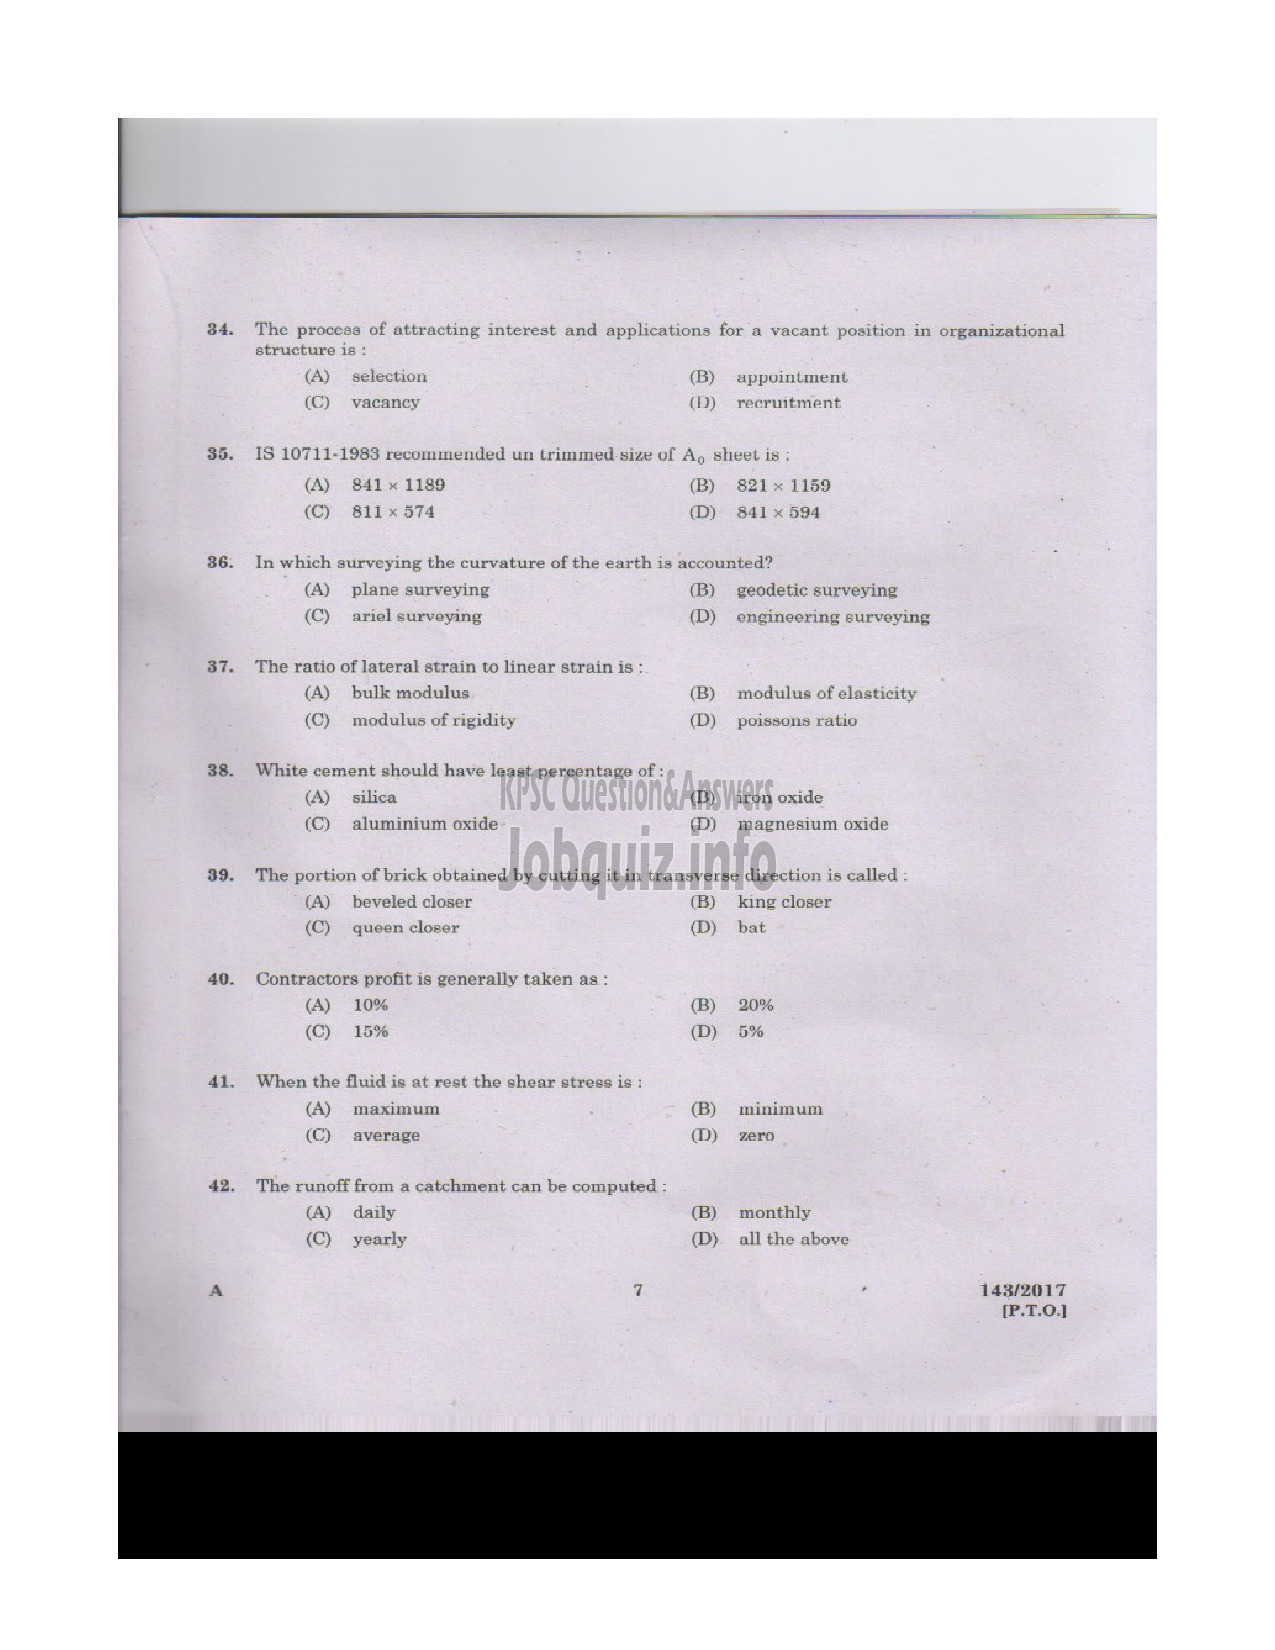 Kerala PSC Question Paper - VOCATIONAL INSTRUCTOR IN CIVIL CONSTRUCTION ANDMAINTENANCE VOCATIONAL HIGHER SECONDARY-6